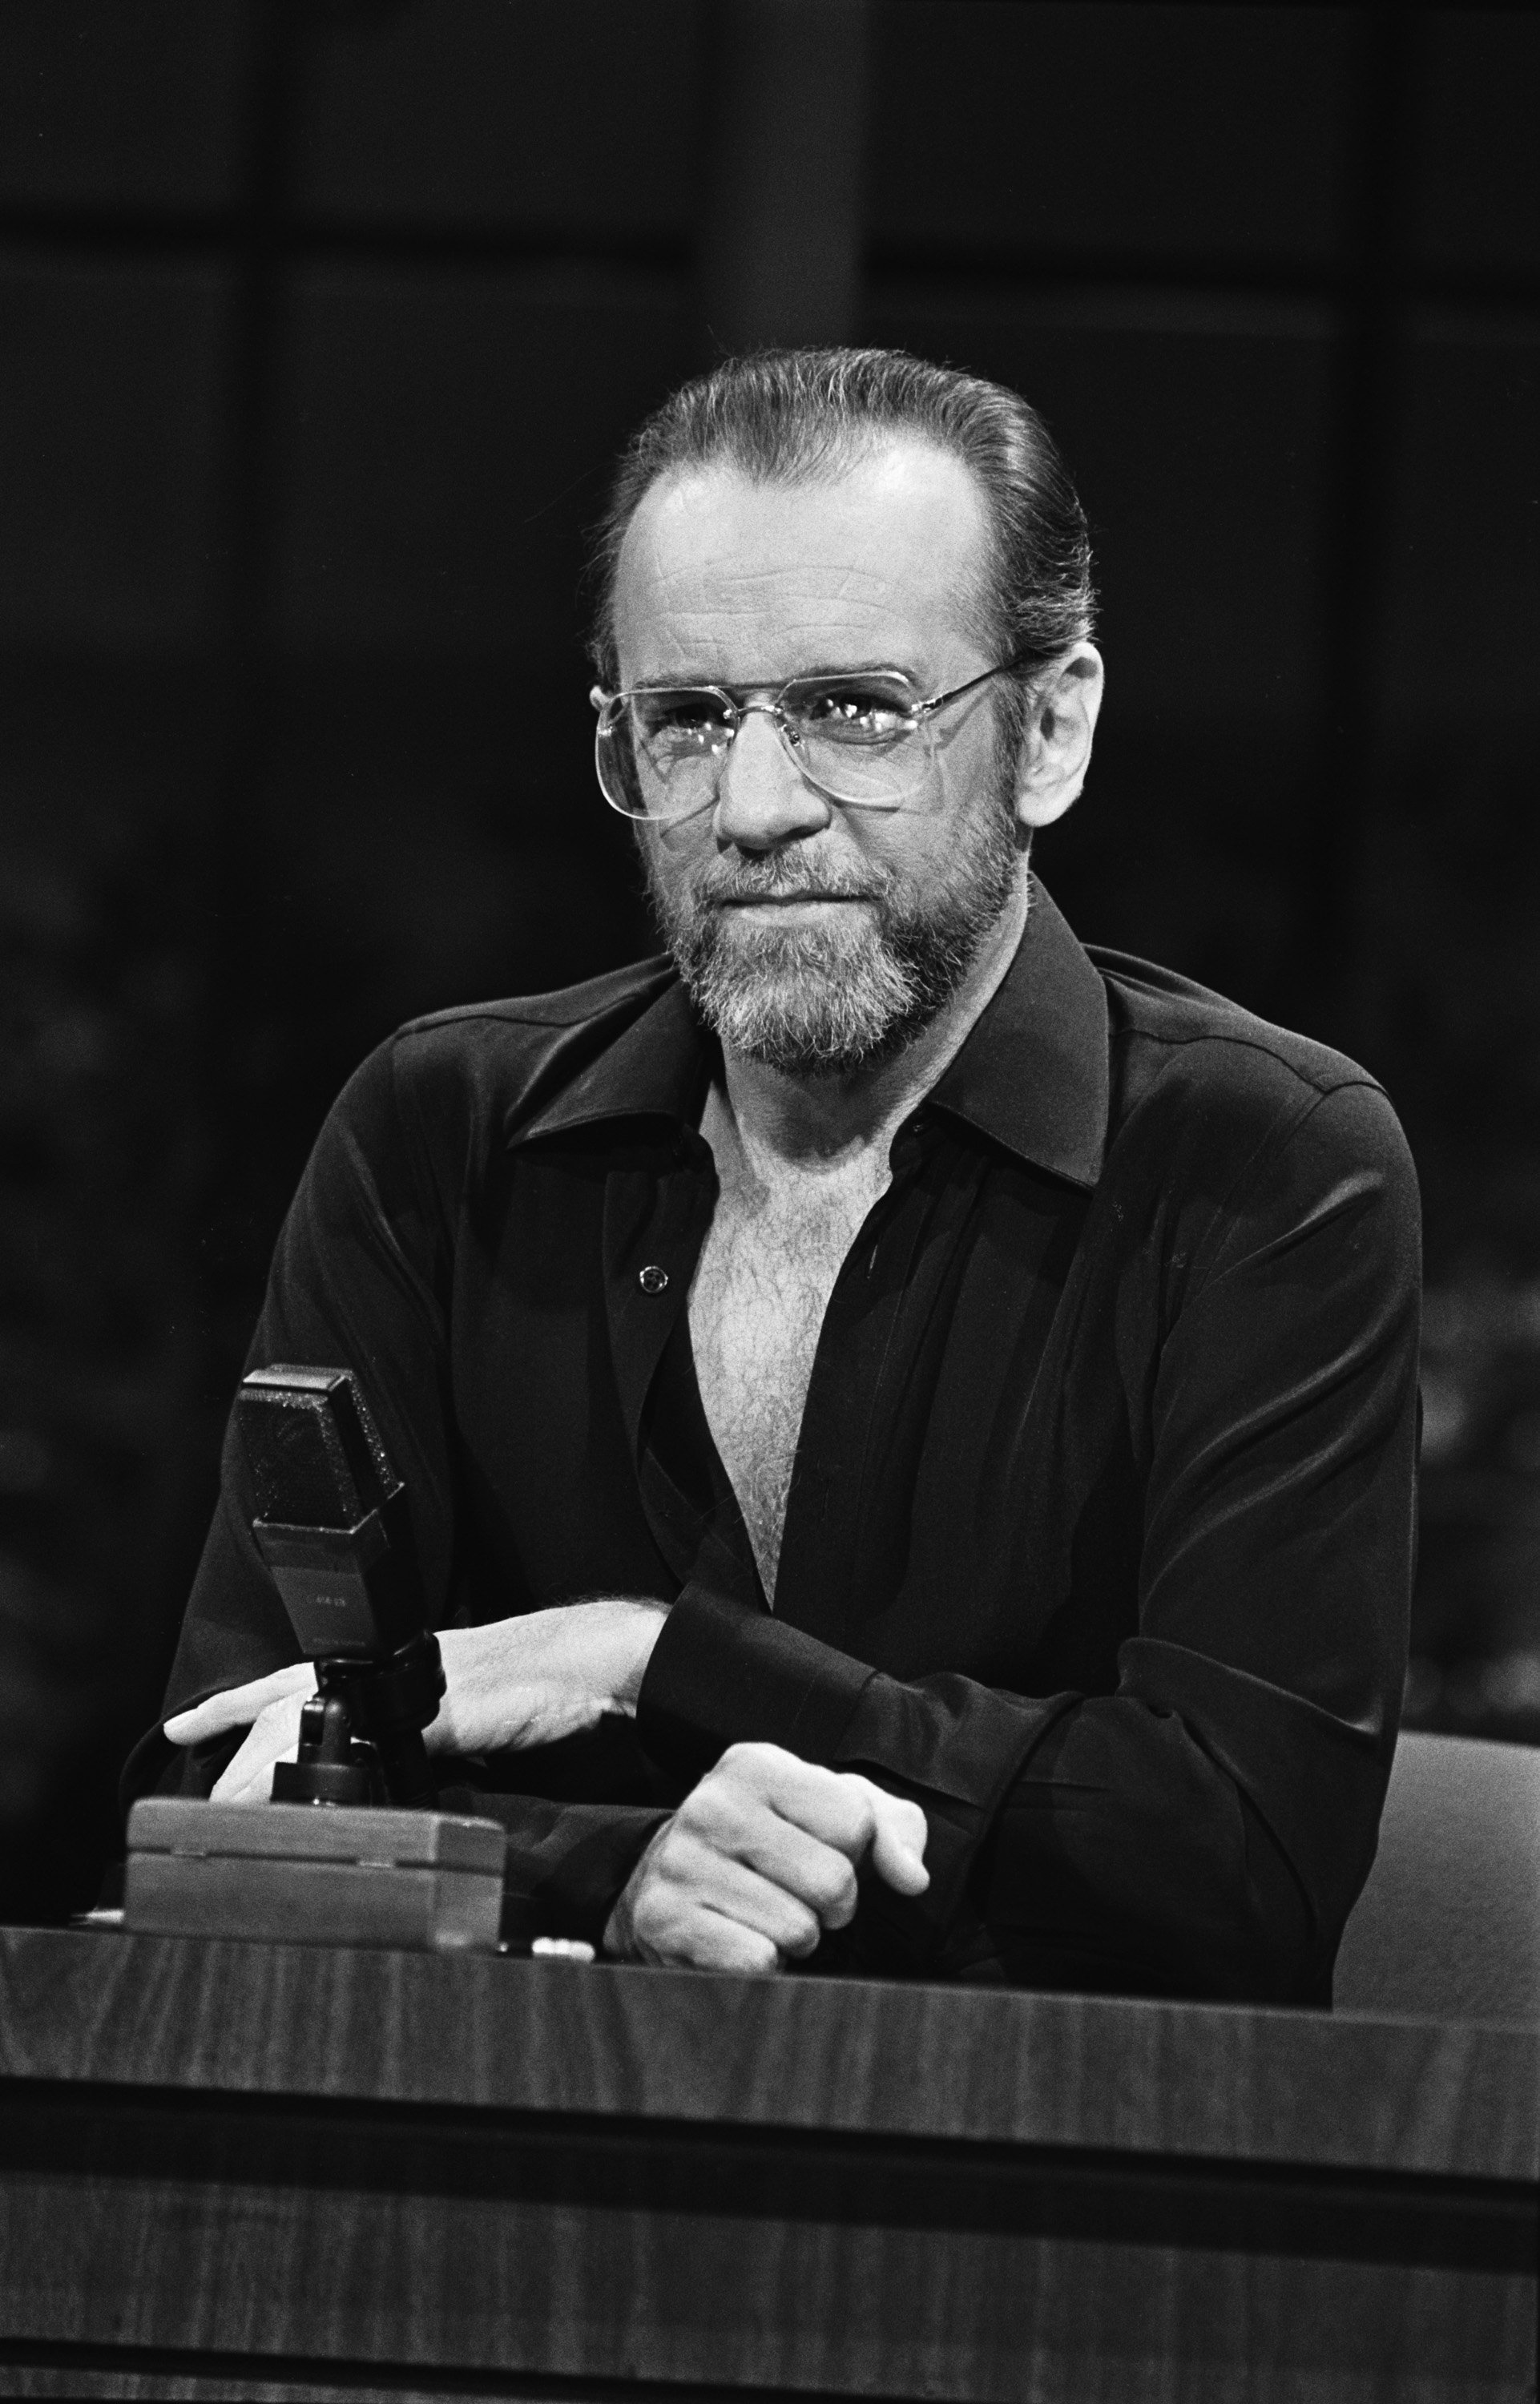 Comedian George Carlin on "The Tonight Show Starring Johnny Carson" on March 12 1989 |  Source: Getty Images